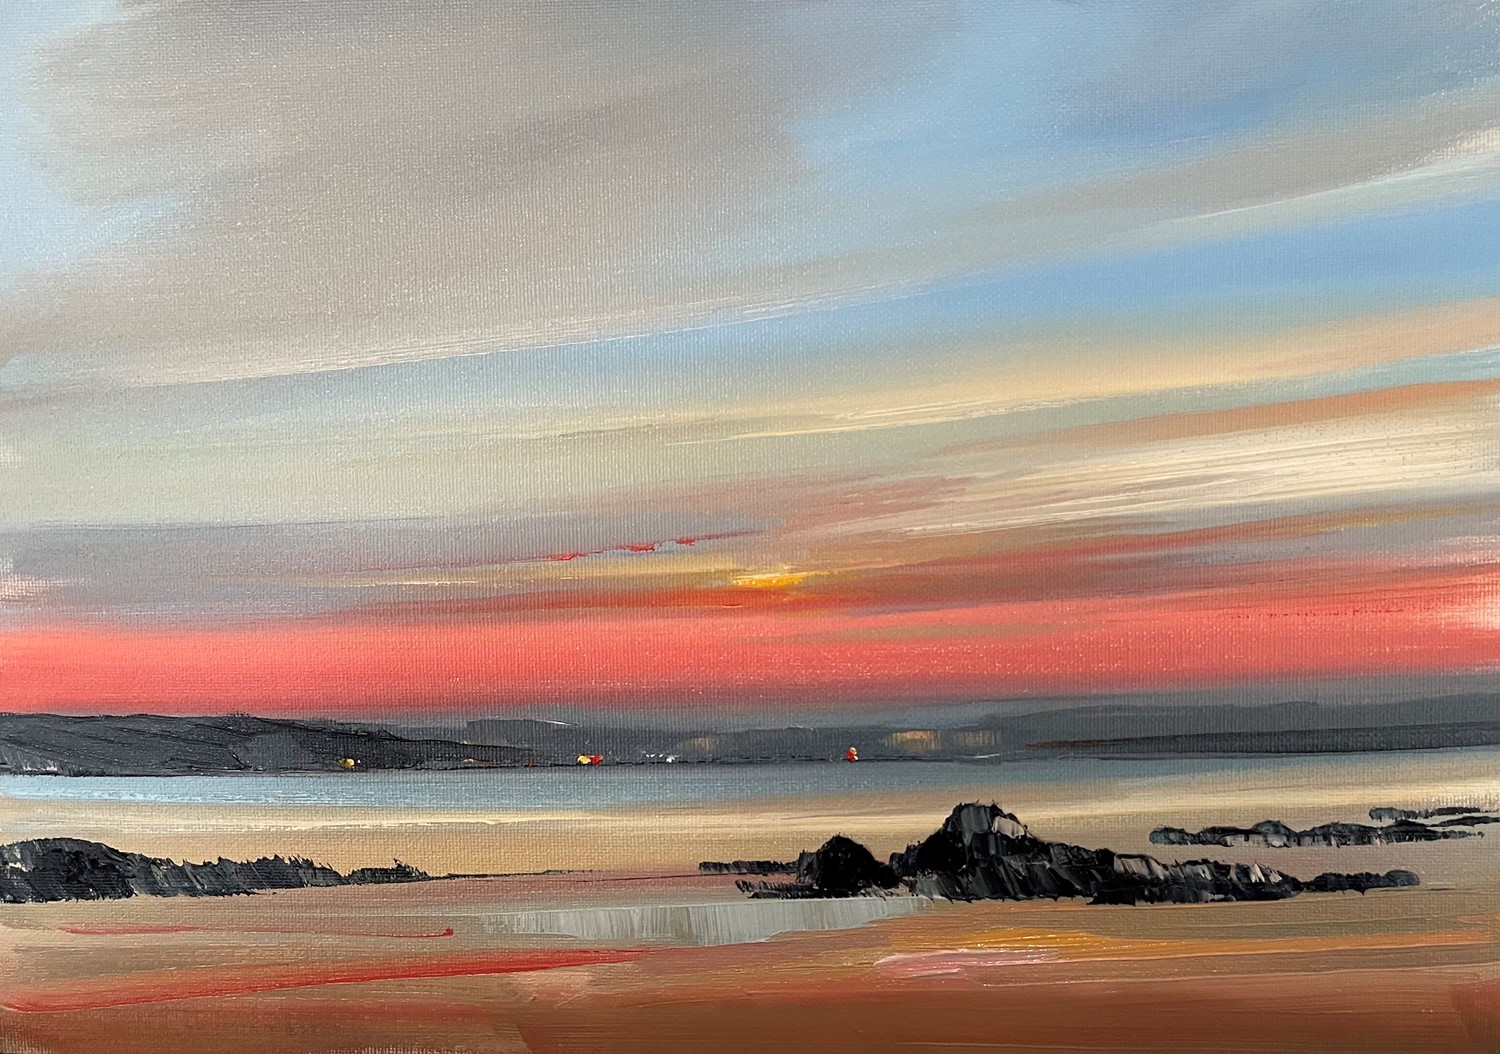 'Beacons across the water ' by artist Rosanne Barr